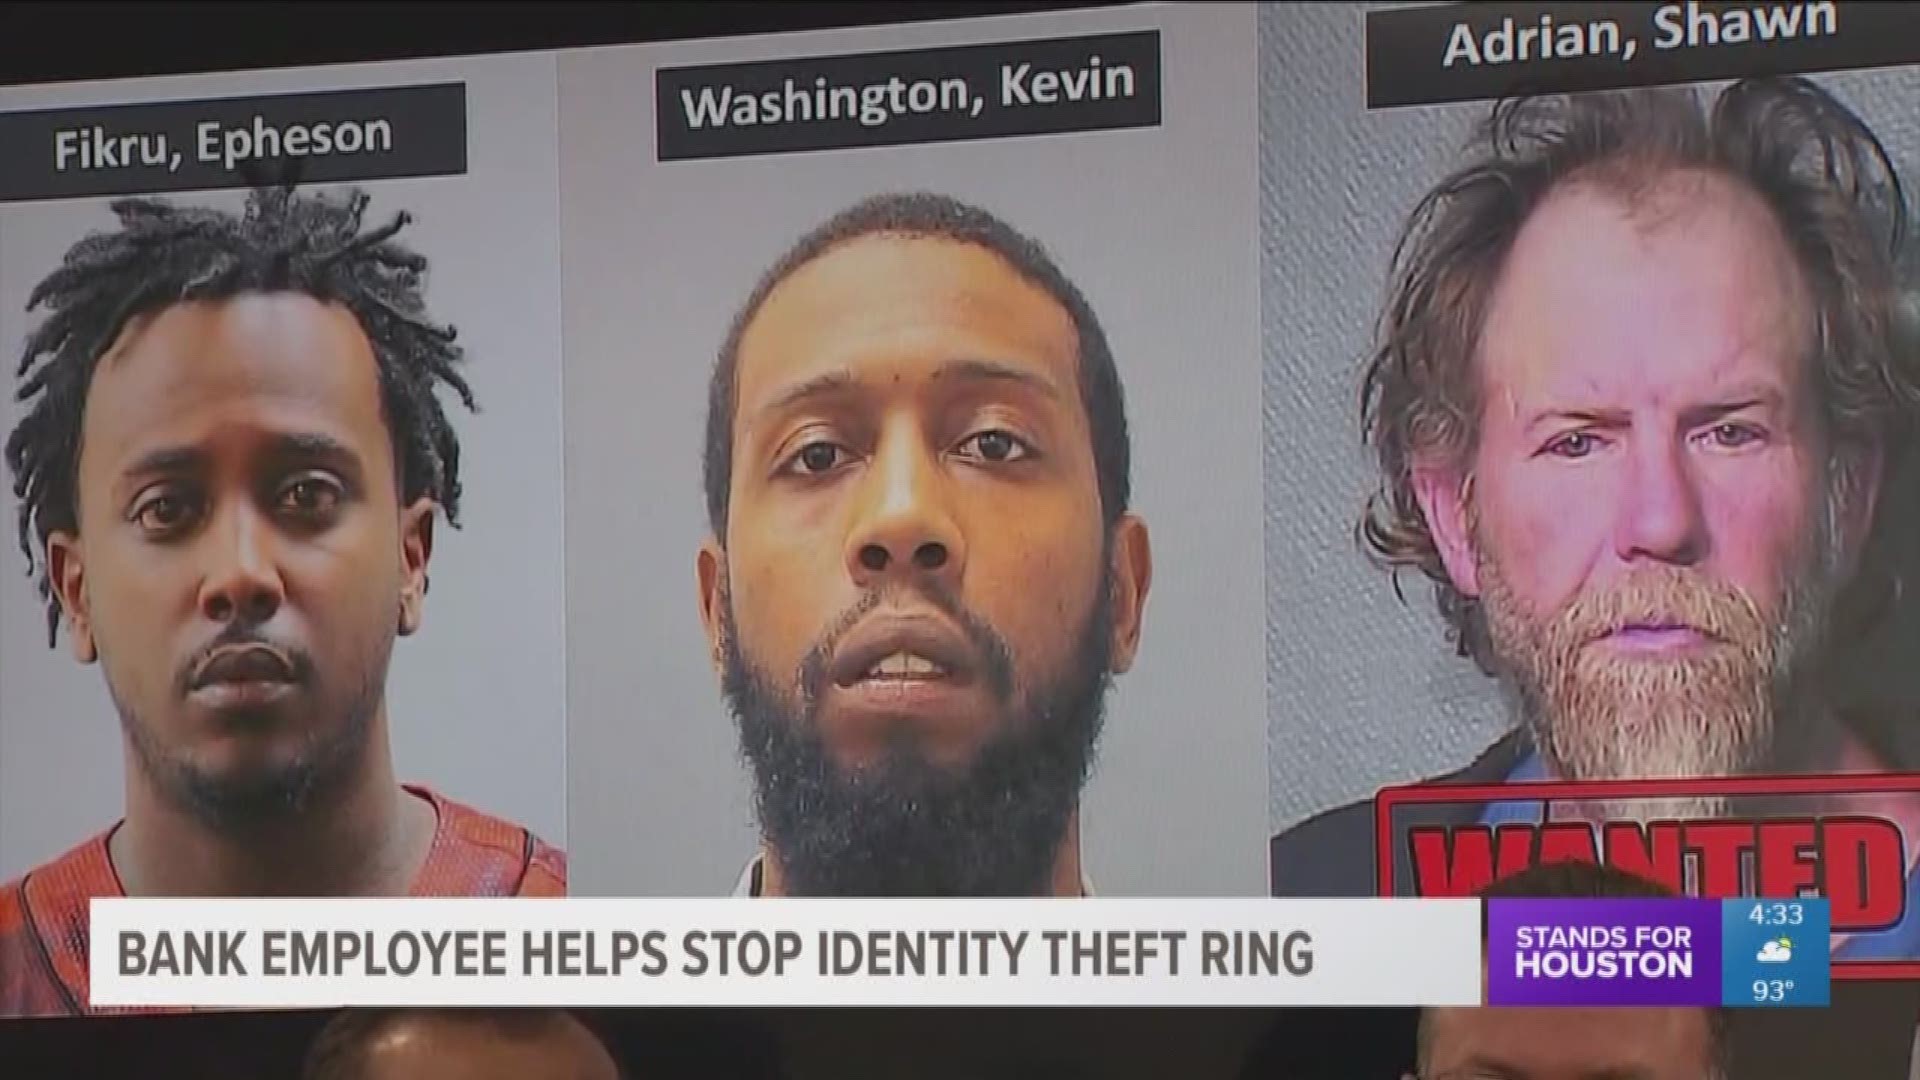 Two men were arrested and are out on bond and another man is on the run after deputies discovered they were stealing people's identities in hopes of stealing thousands of dollars. 